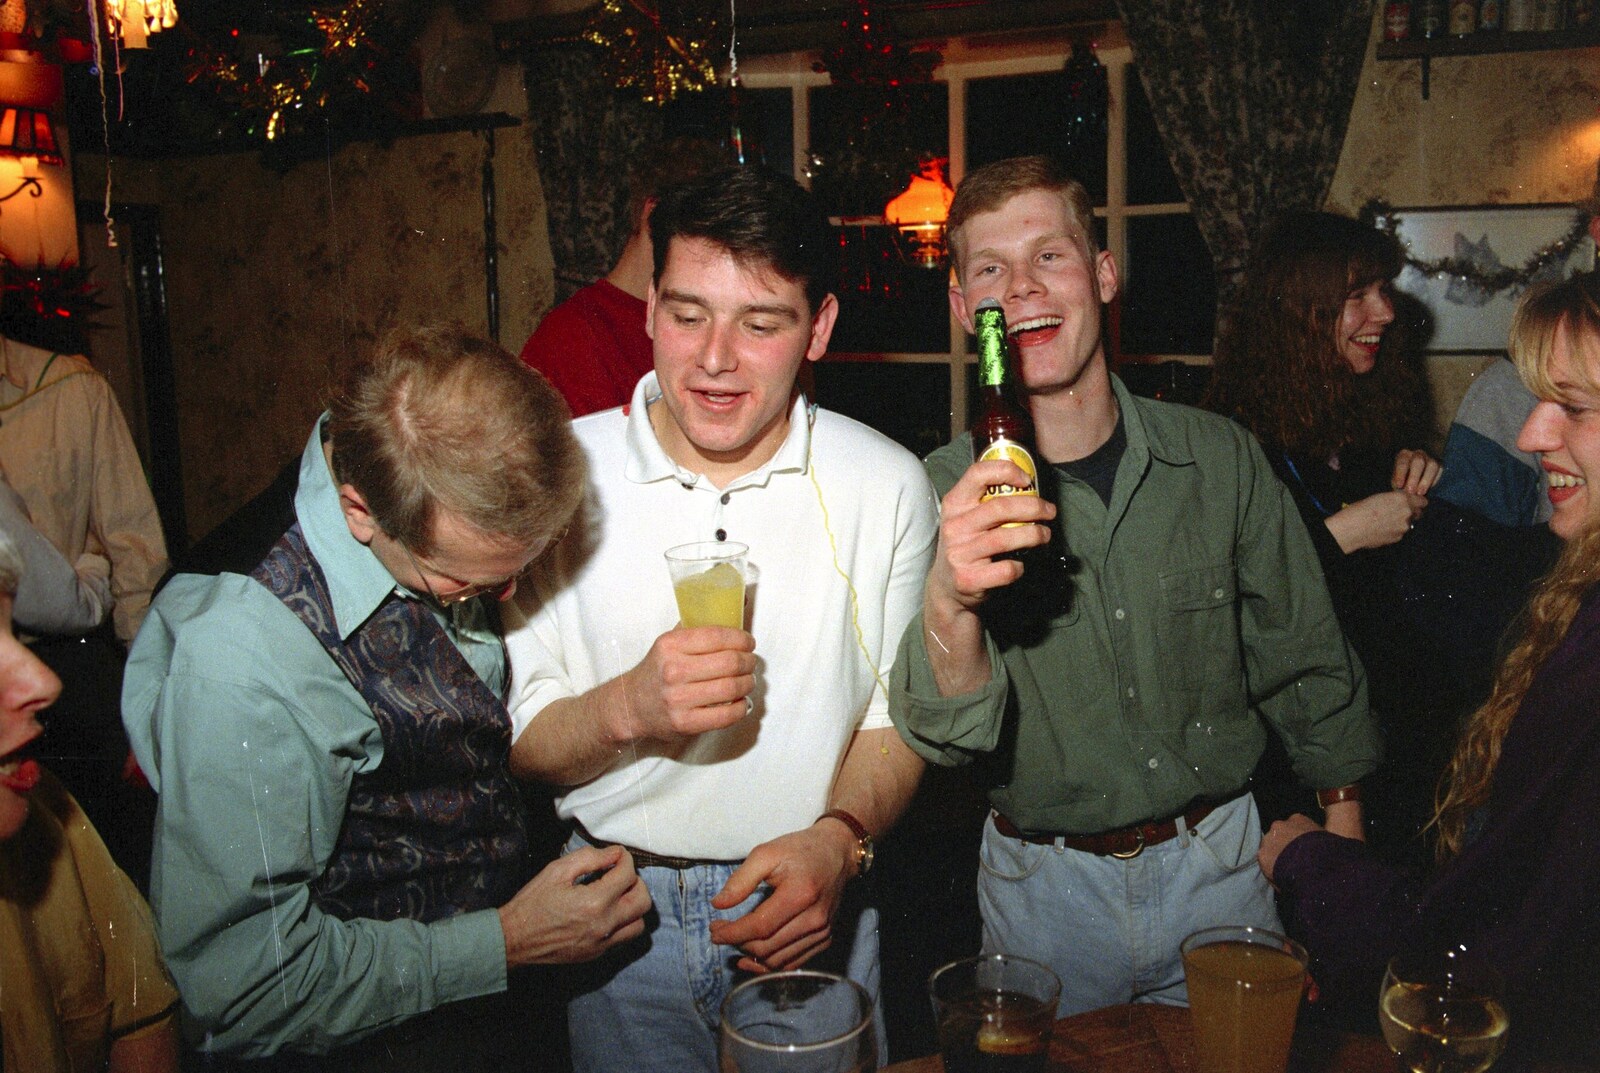 Mikey holds up a bottle of Pils from New Year's Eve at the Swan Inn, Brome, Suffolk - 31st December 1994